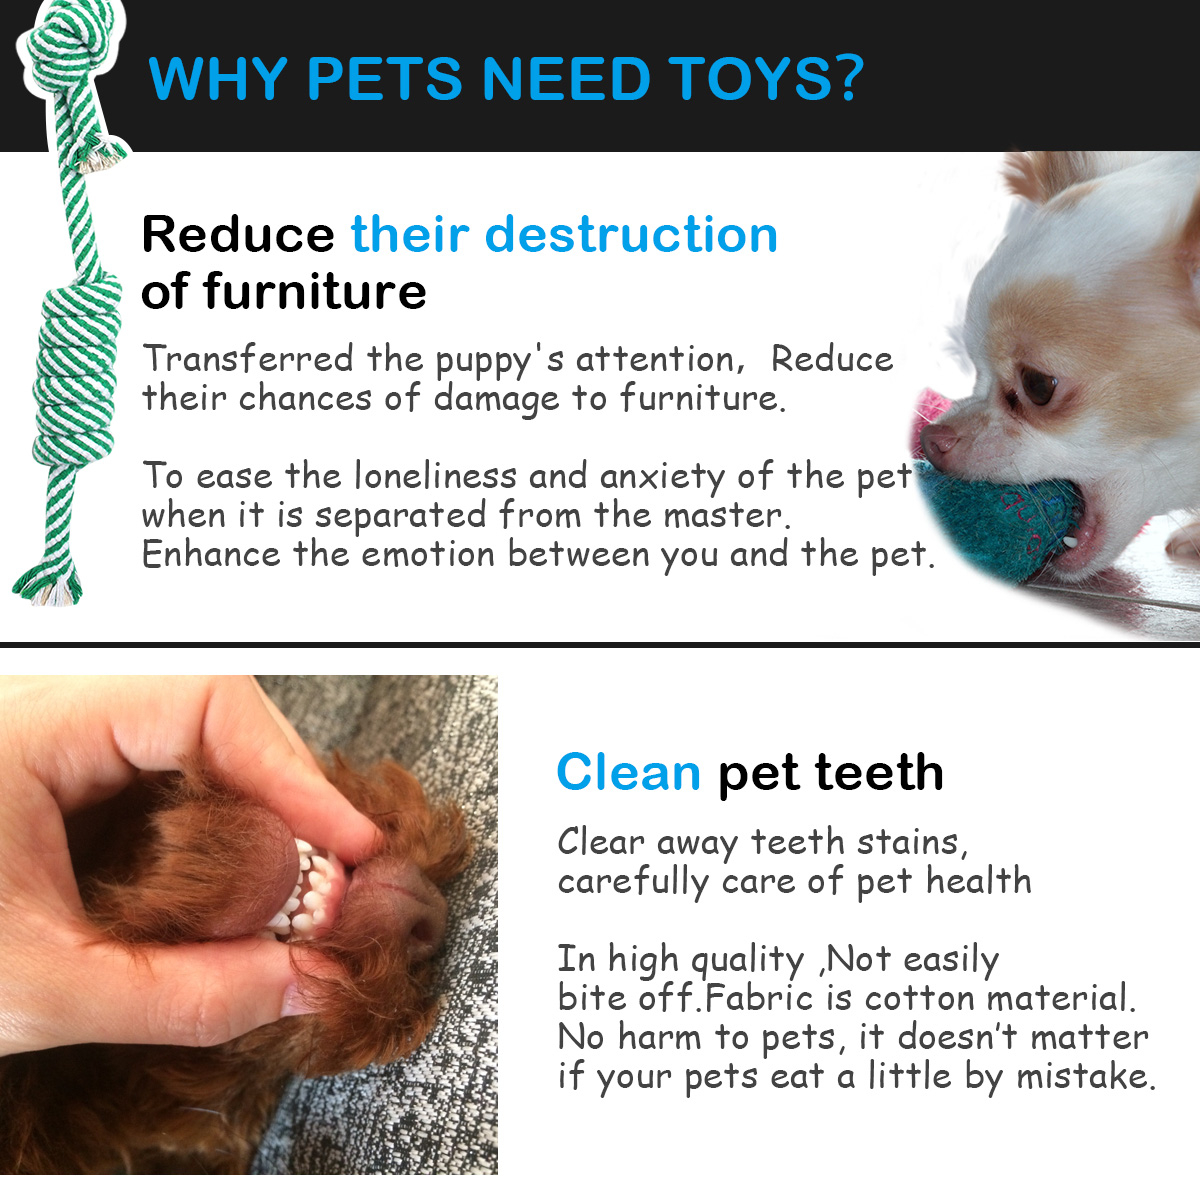 Puppy Teeth Diagram 5 Stylesset Pet Dogs Rope Toys Puppy Dog Braided Rope Chew Durable Interactive Cotton Toys Dental Health Teeth Cleaning